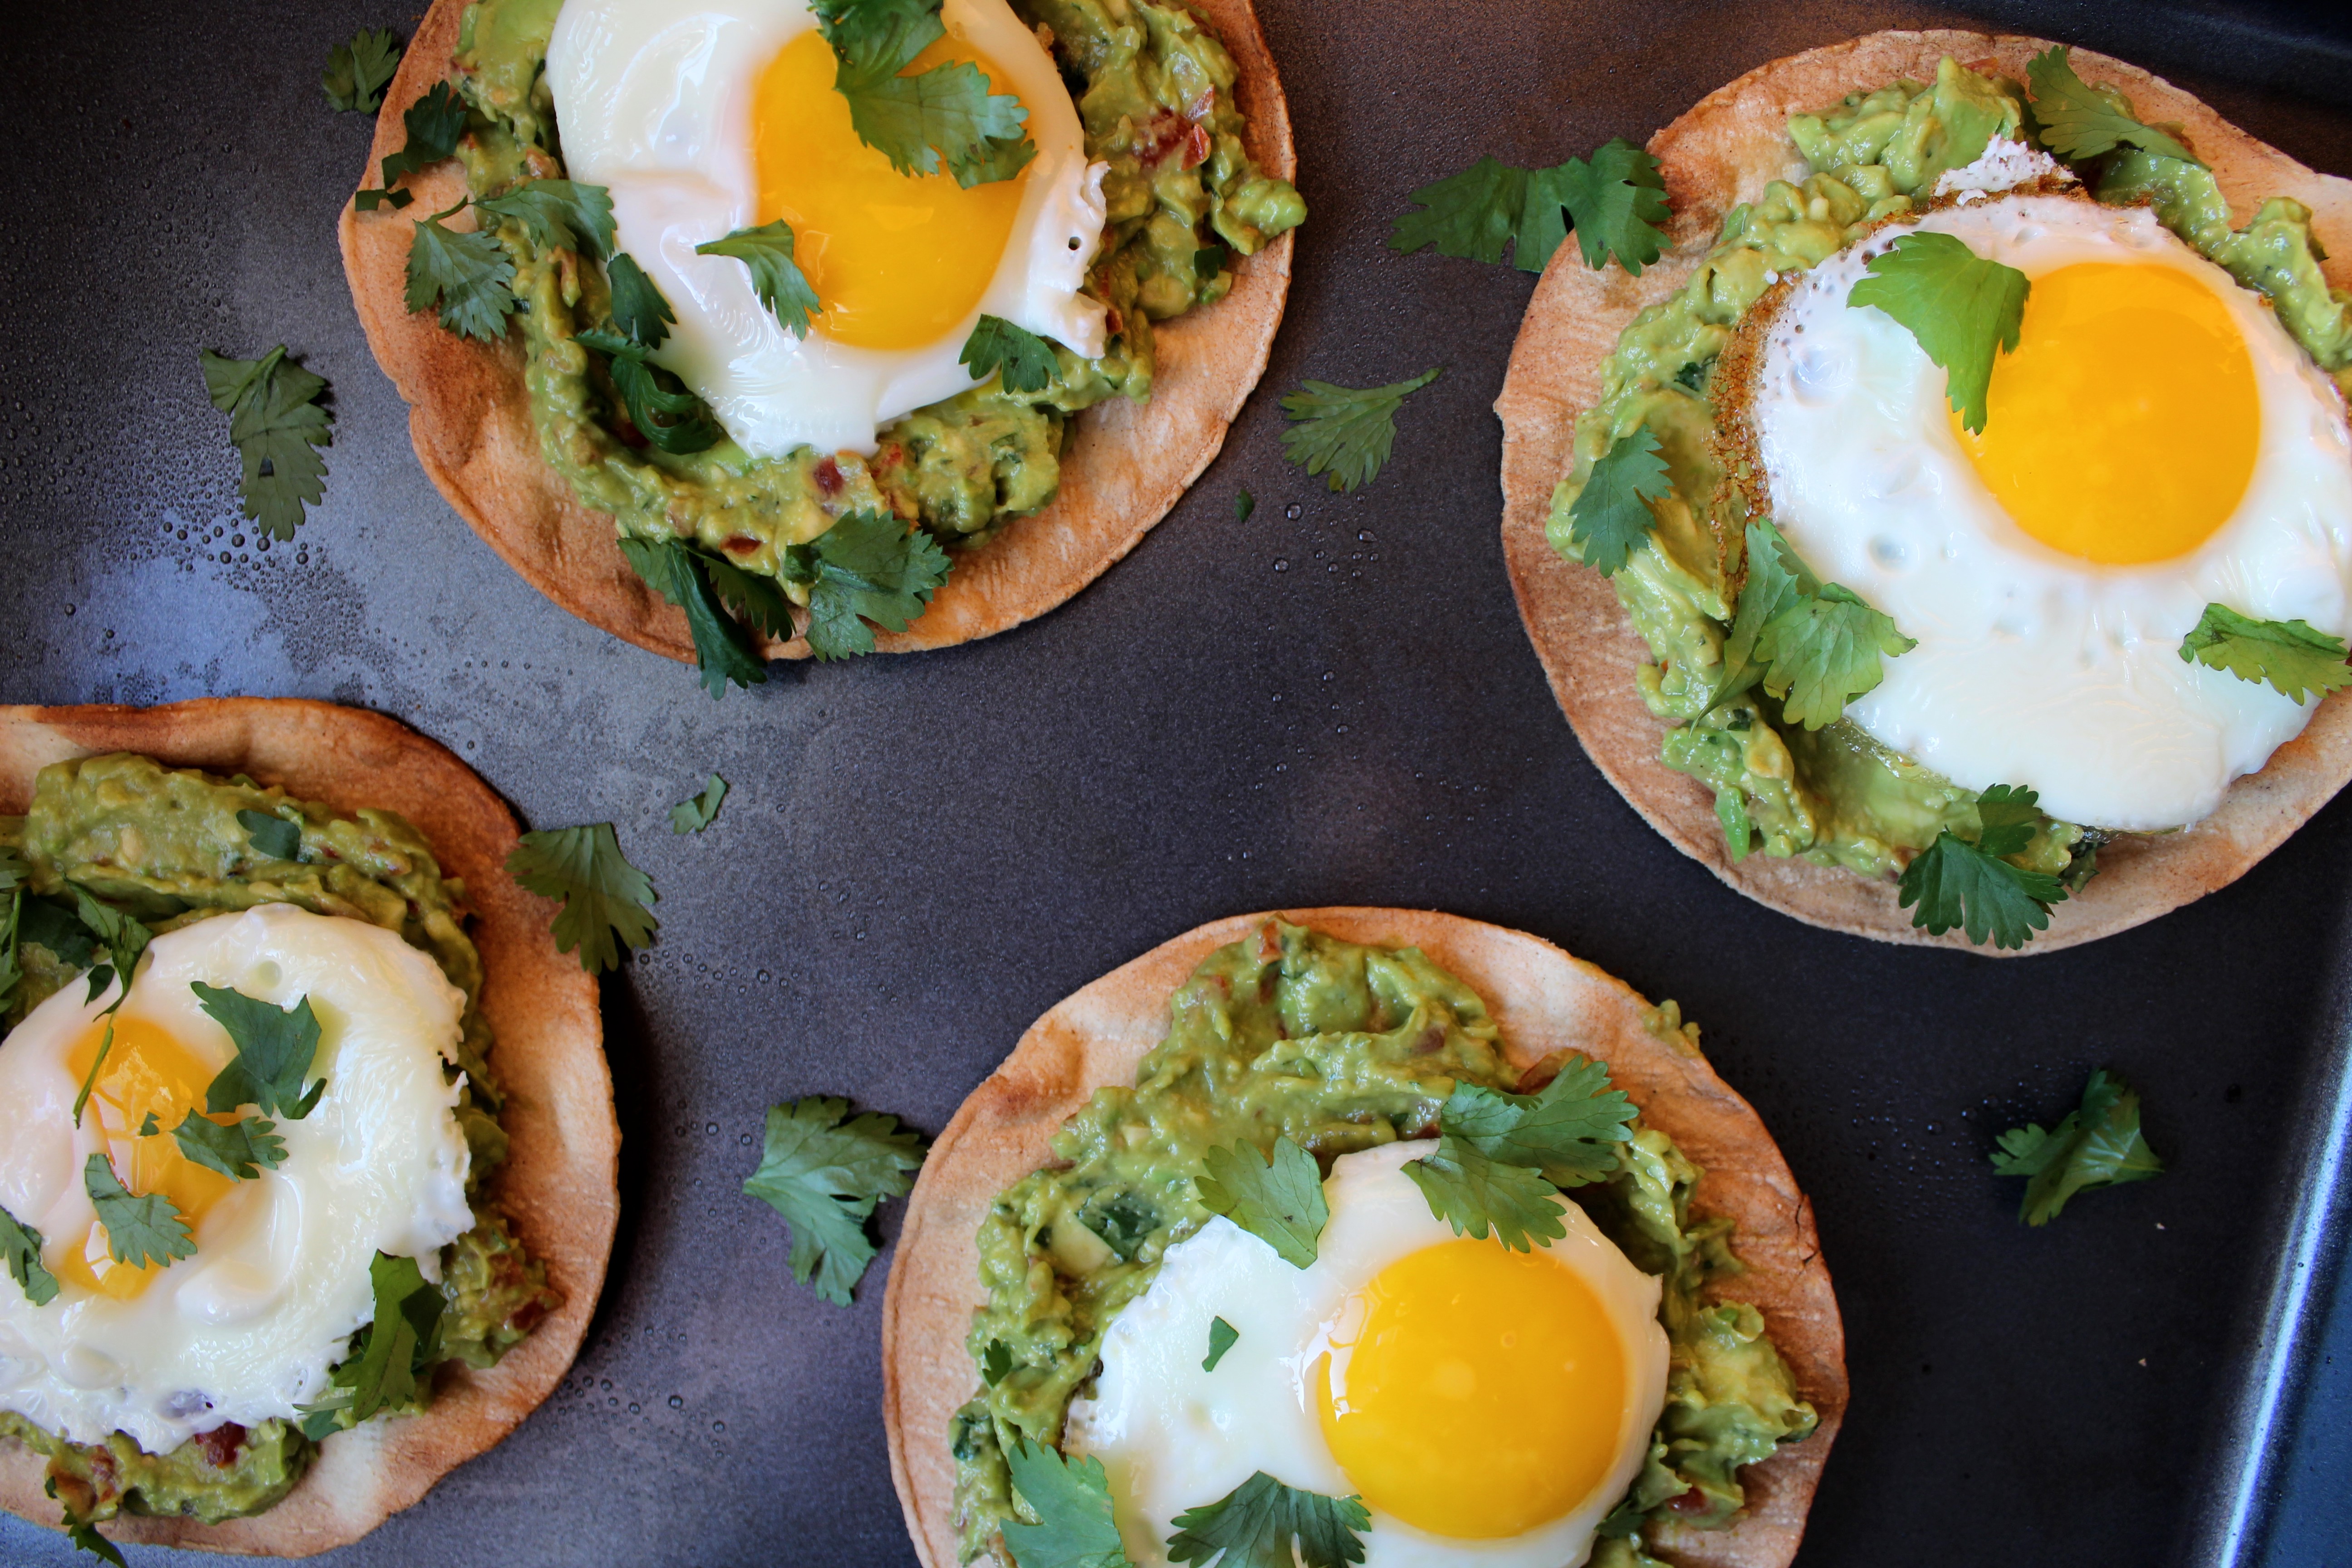 Avocado Breakfast Tostadas - Crispy, oven-baked tortillas topped with fresh guacamole and fried eggs